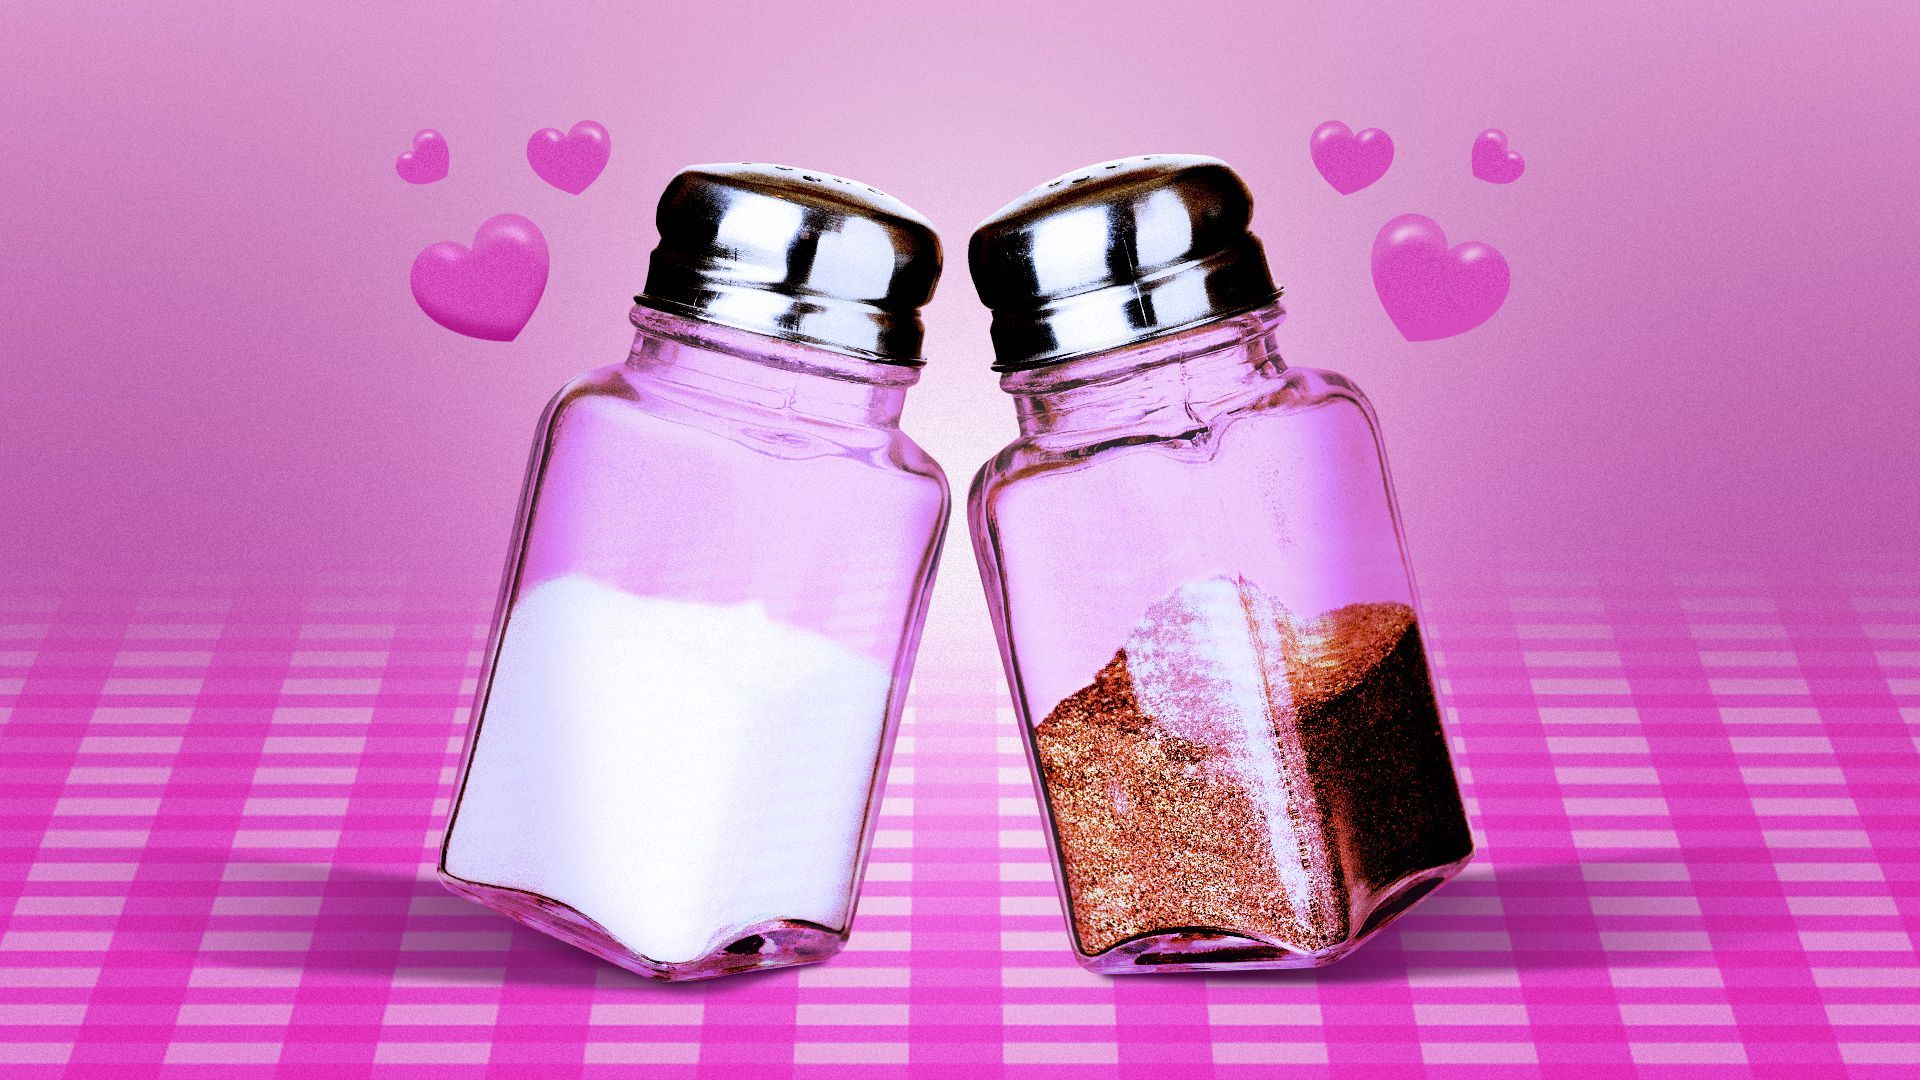 Illustration of a salt and pepper shaker leaning in towards one another on a table with hearts surrounding them